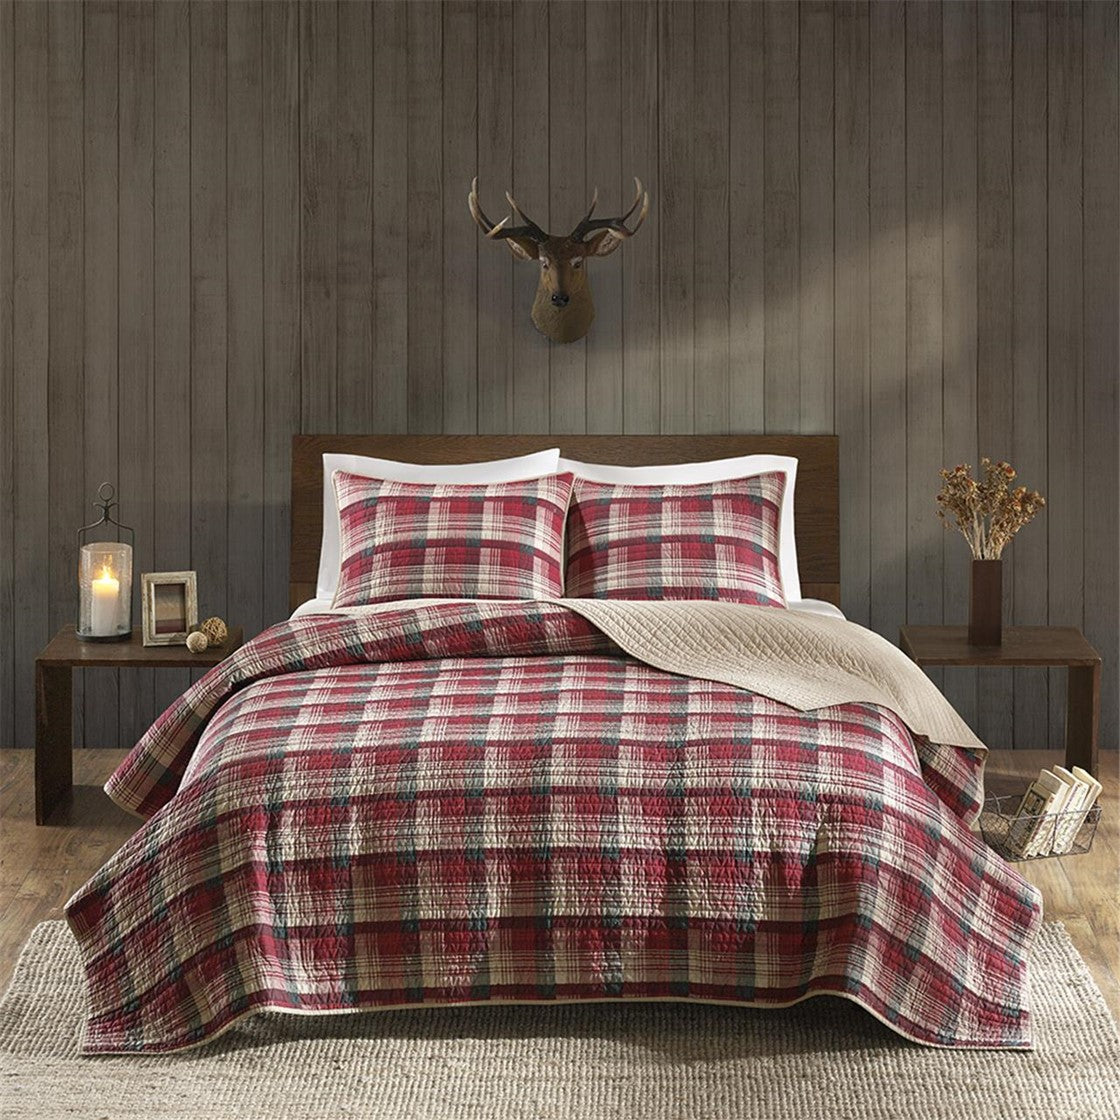 Woolrich Tasha Quilt Mini Set - Red - King Size / Cal King Size